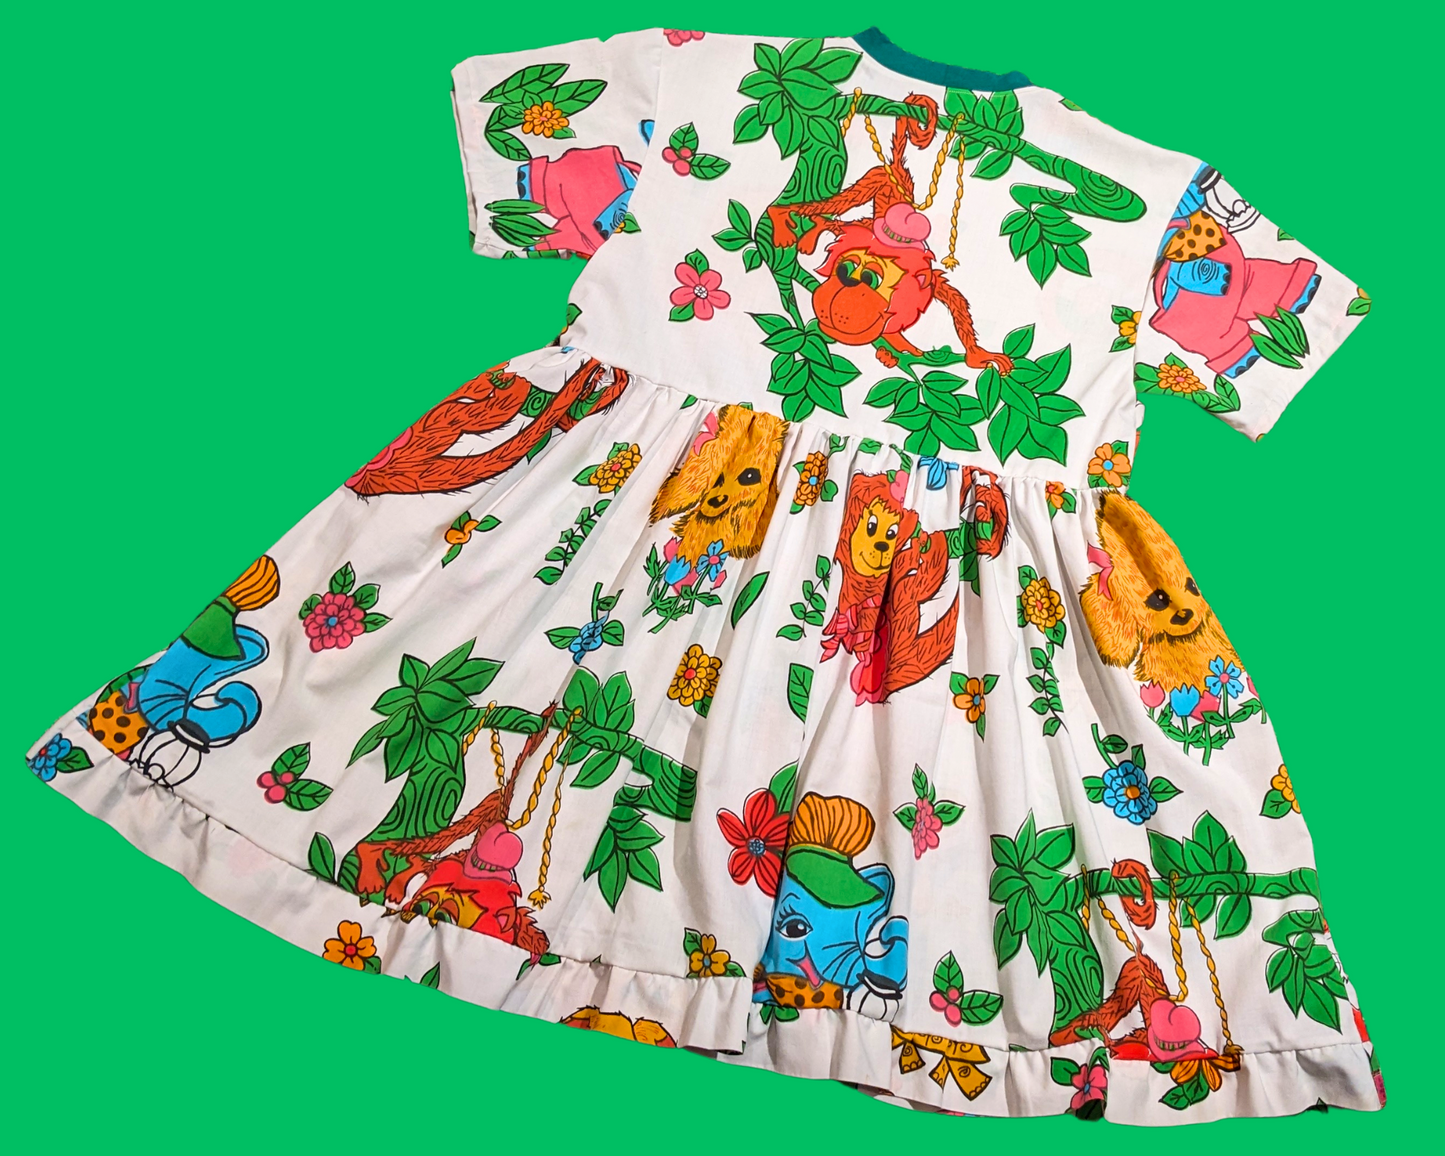 Handmade, Upcycled Vintage 1980's Groovy Animals Patterned Bedsheet T-Shirt Dress Fits Size S-M-L-XL